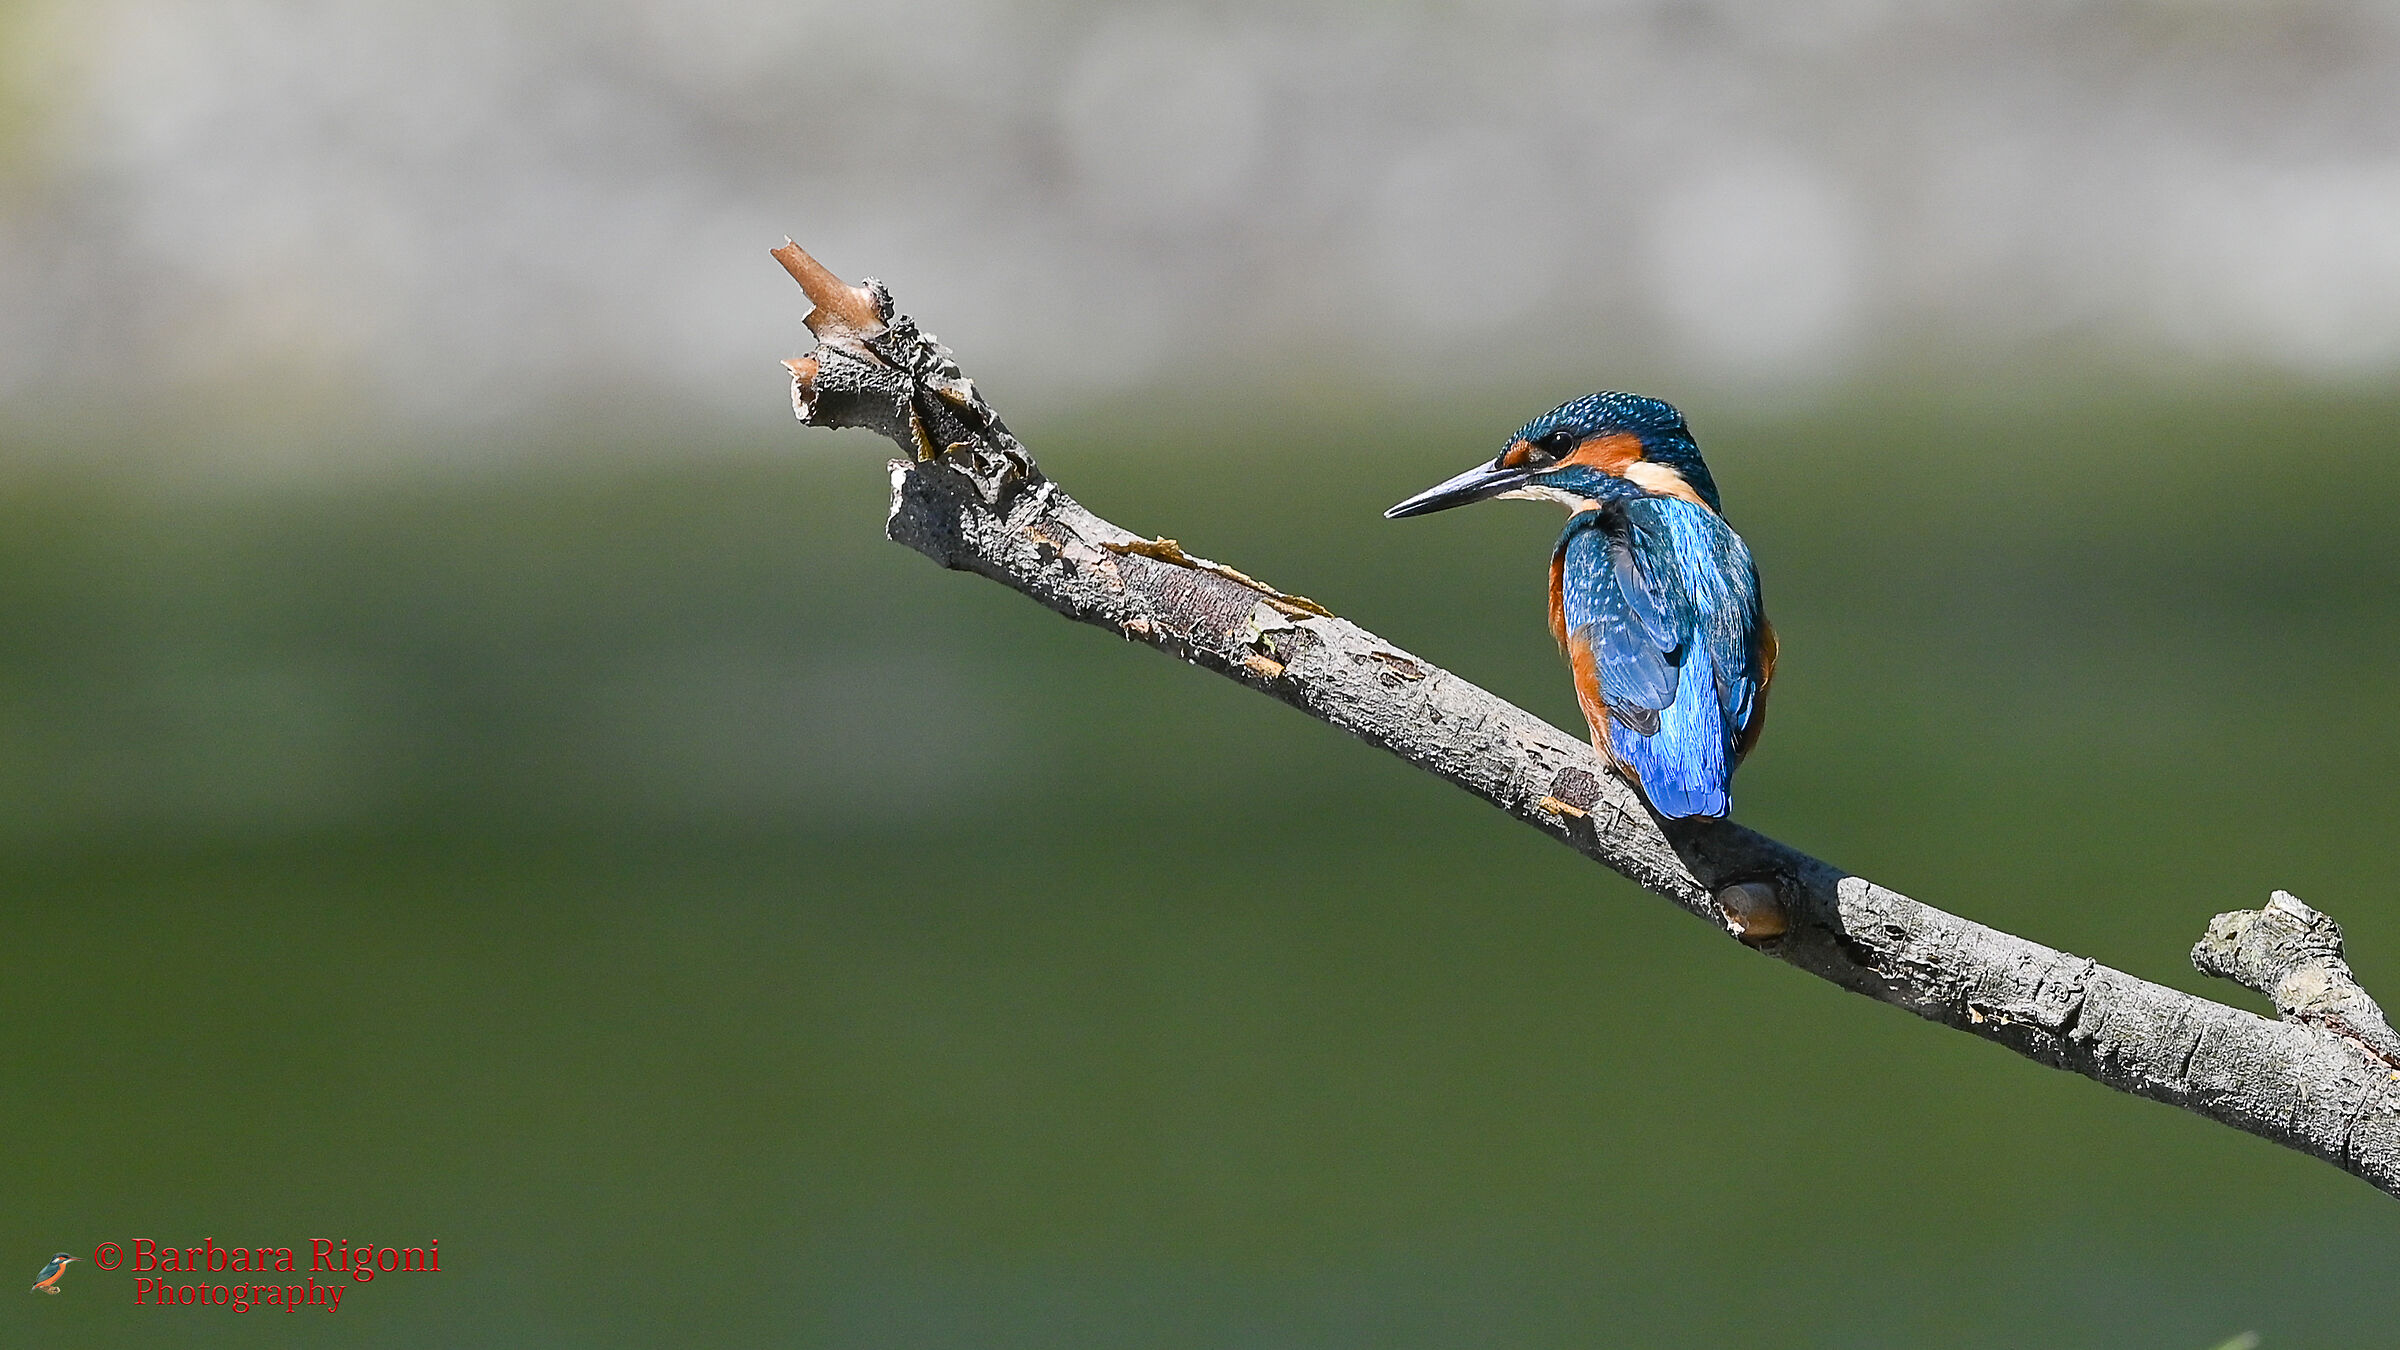 Kingfisher on the branch...